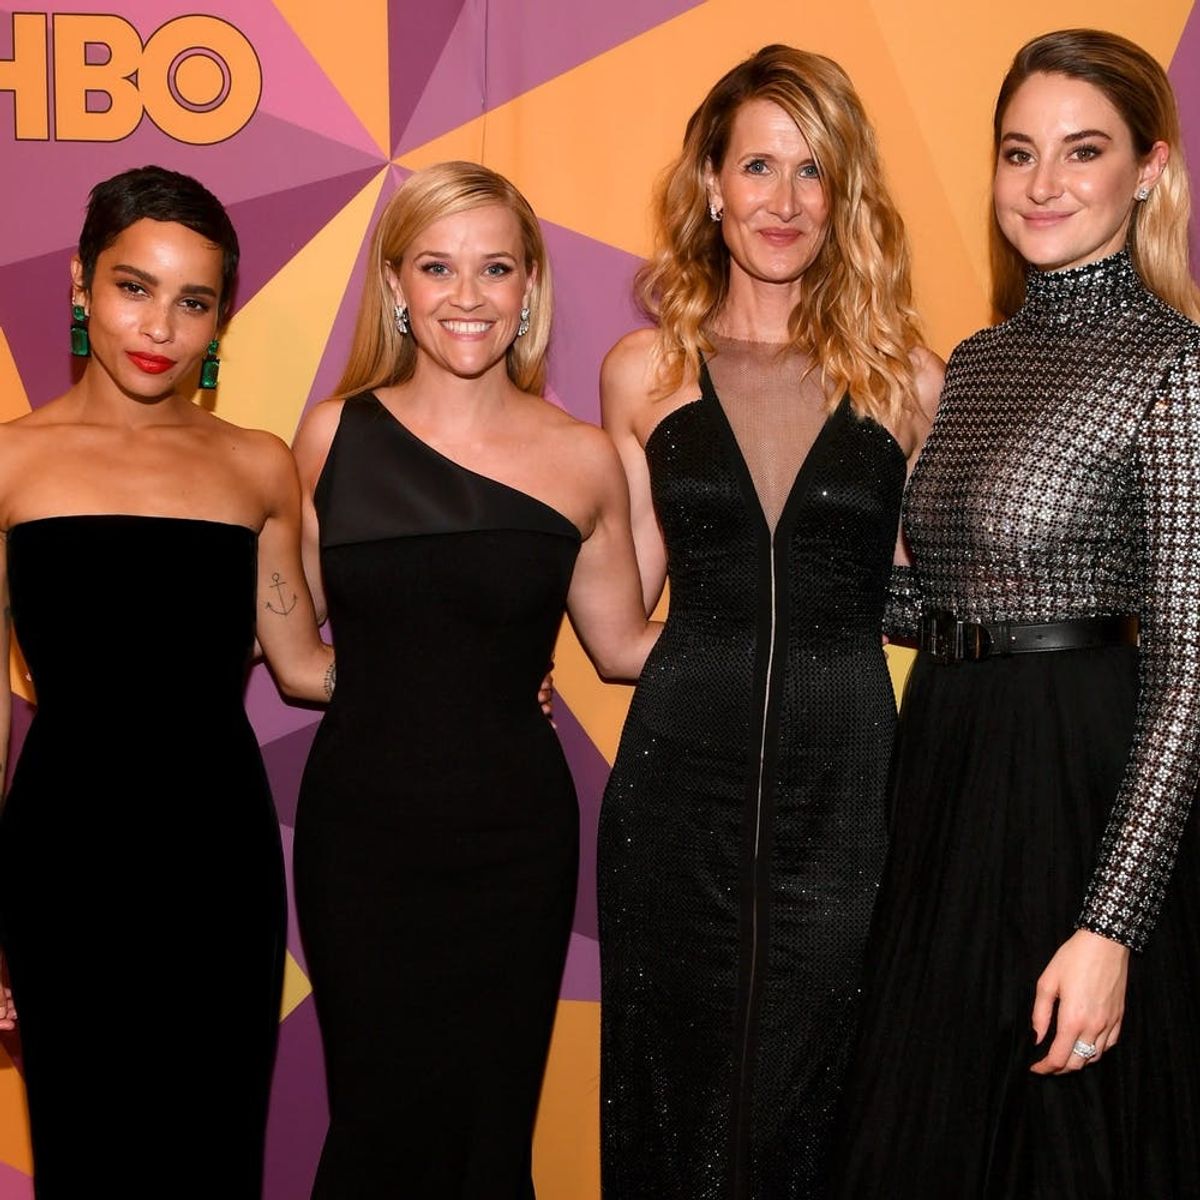 Shailene Woodley’s ‘Big Little Lies’ Costars Showed Their Support for Her New Movie in the Sweetest Way